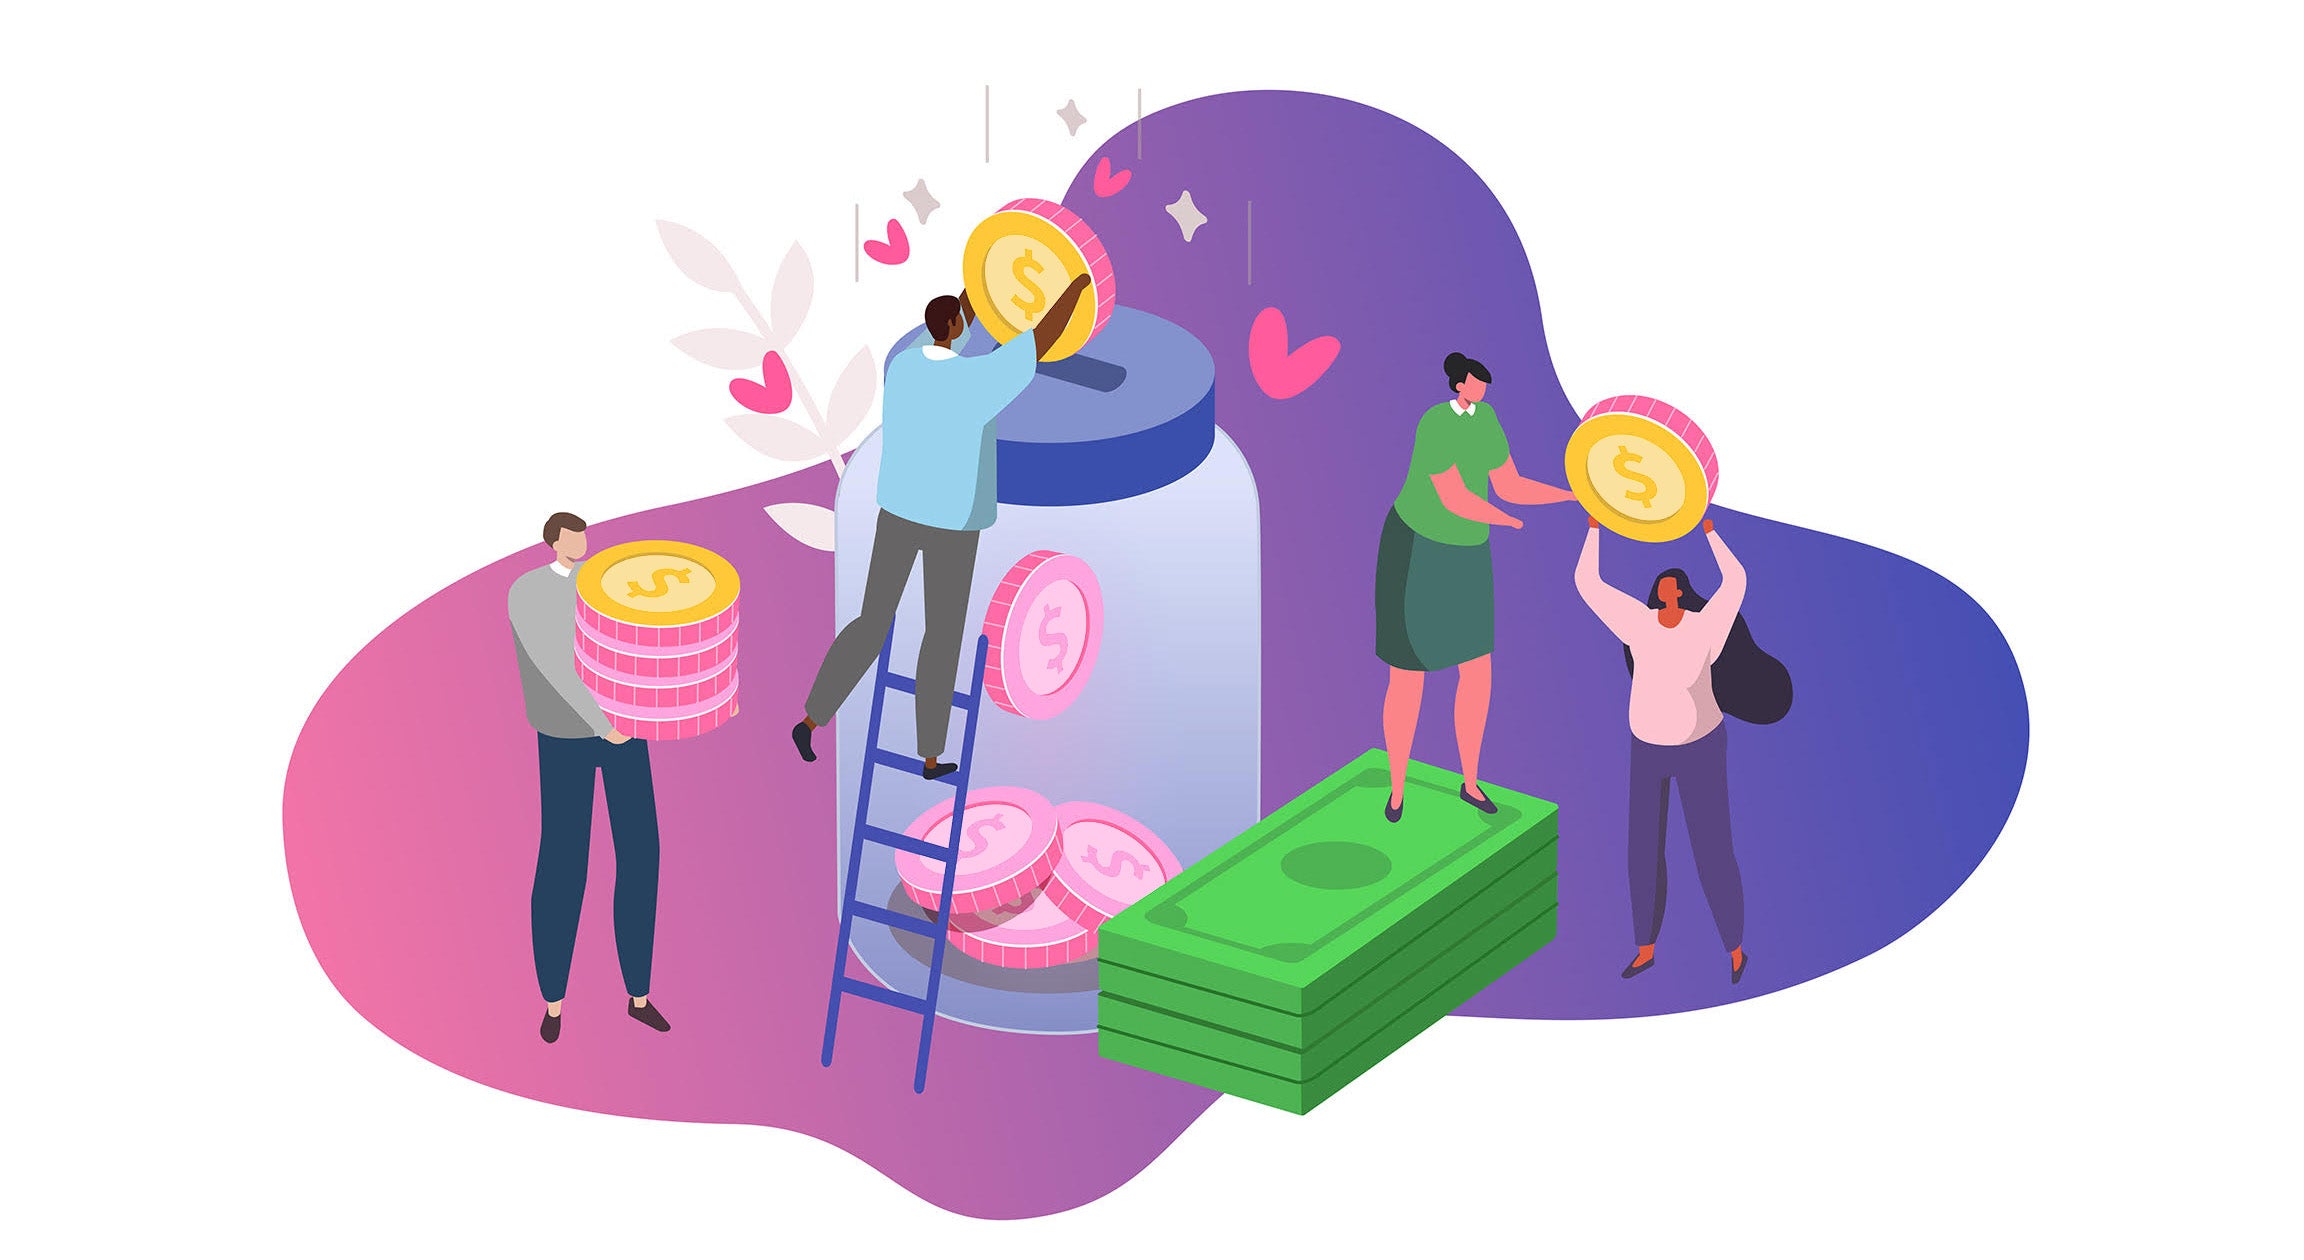 Illustration. Scene depicts four people working together to fill a larger than life jar with larger than life money. The image depicts teamwork, successful fundraising, and has a cheerful color palette.